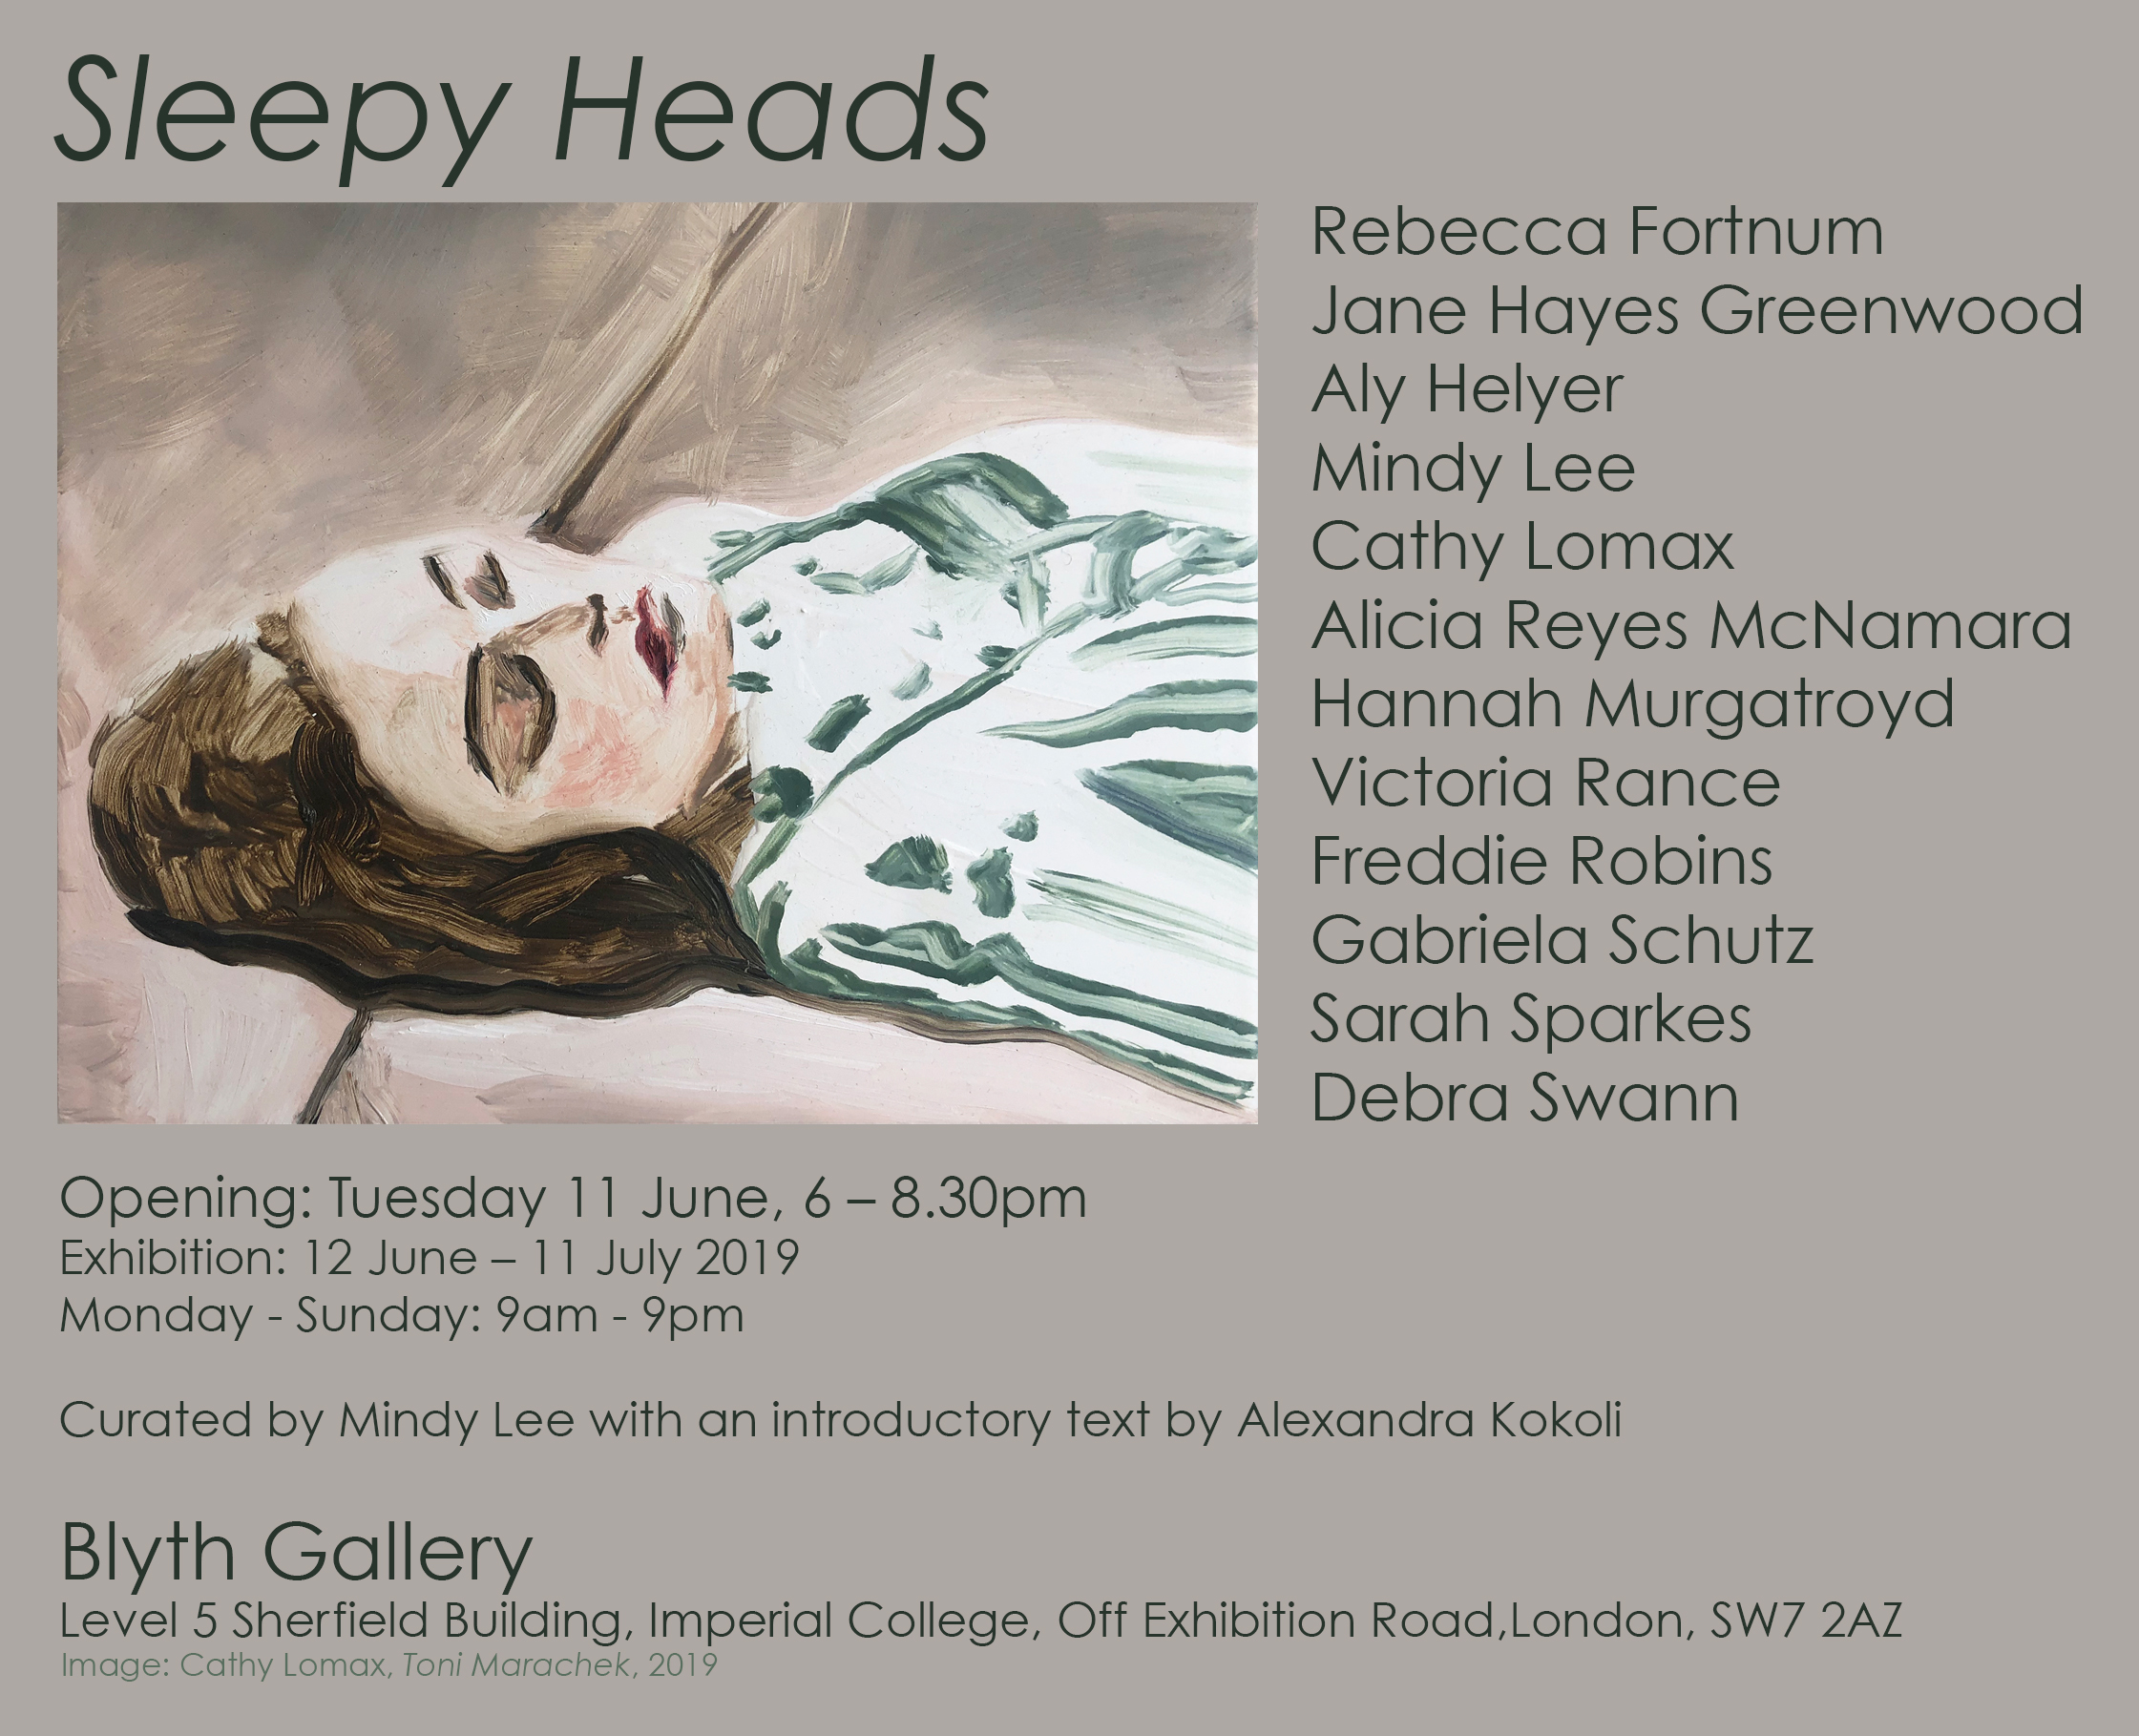 Sleepy Heads, Blyth Gallery, Imperial College, London, Wednesday 12 June - Thursday 11 July 2019